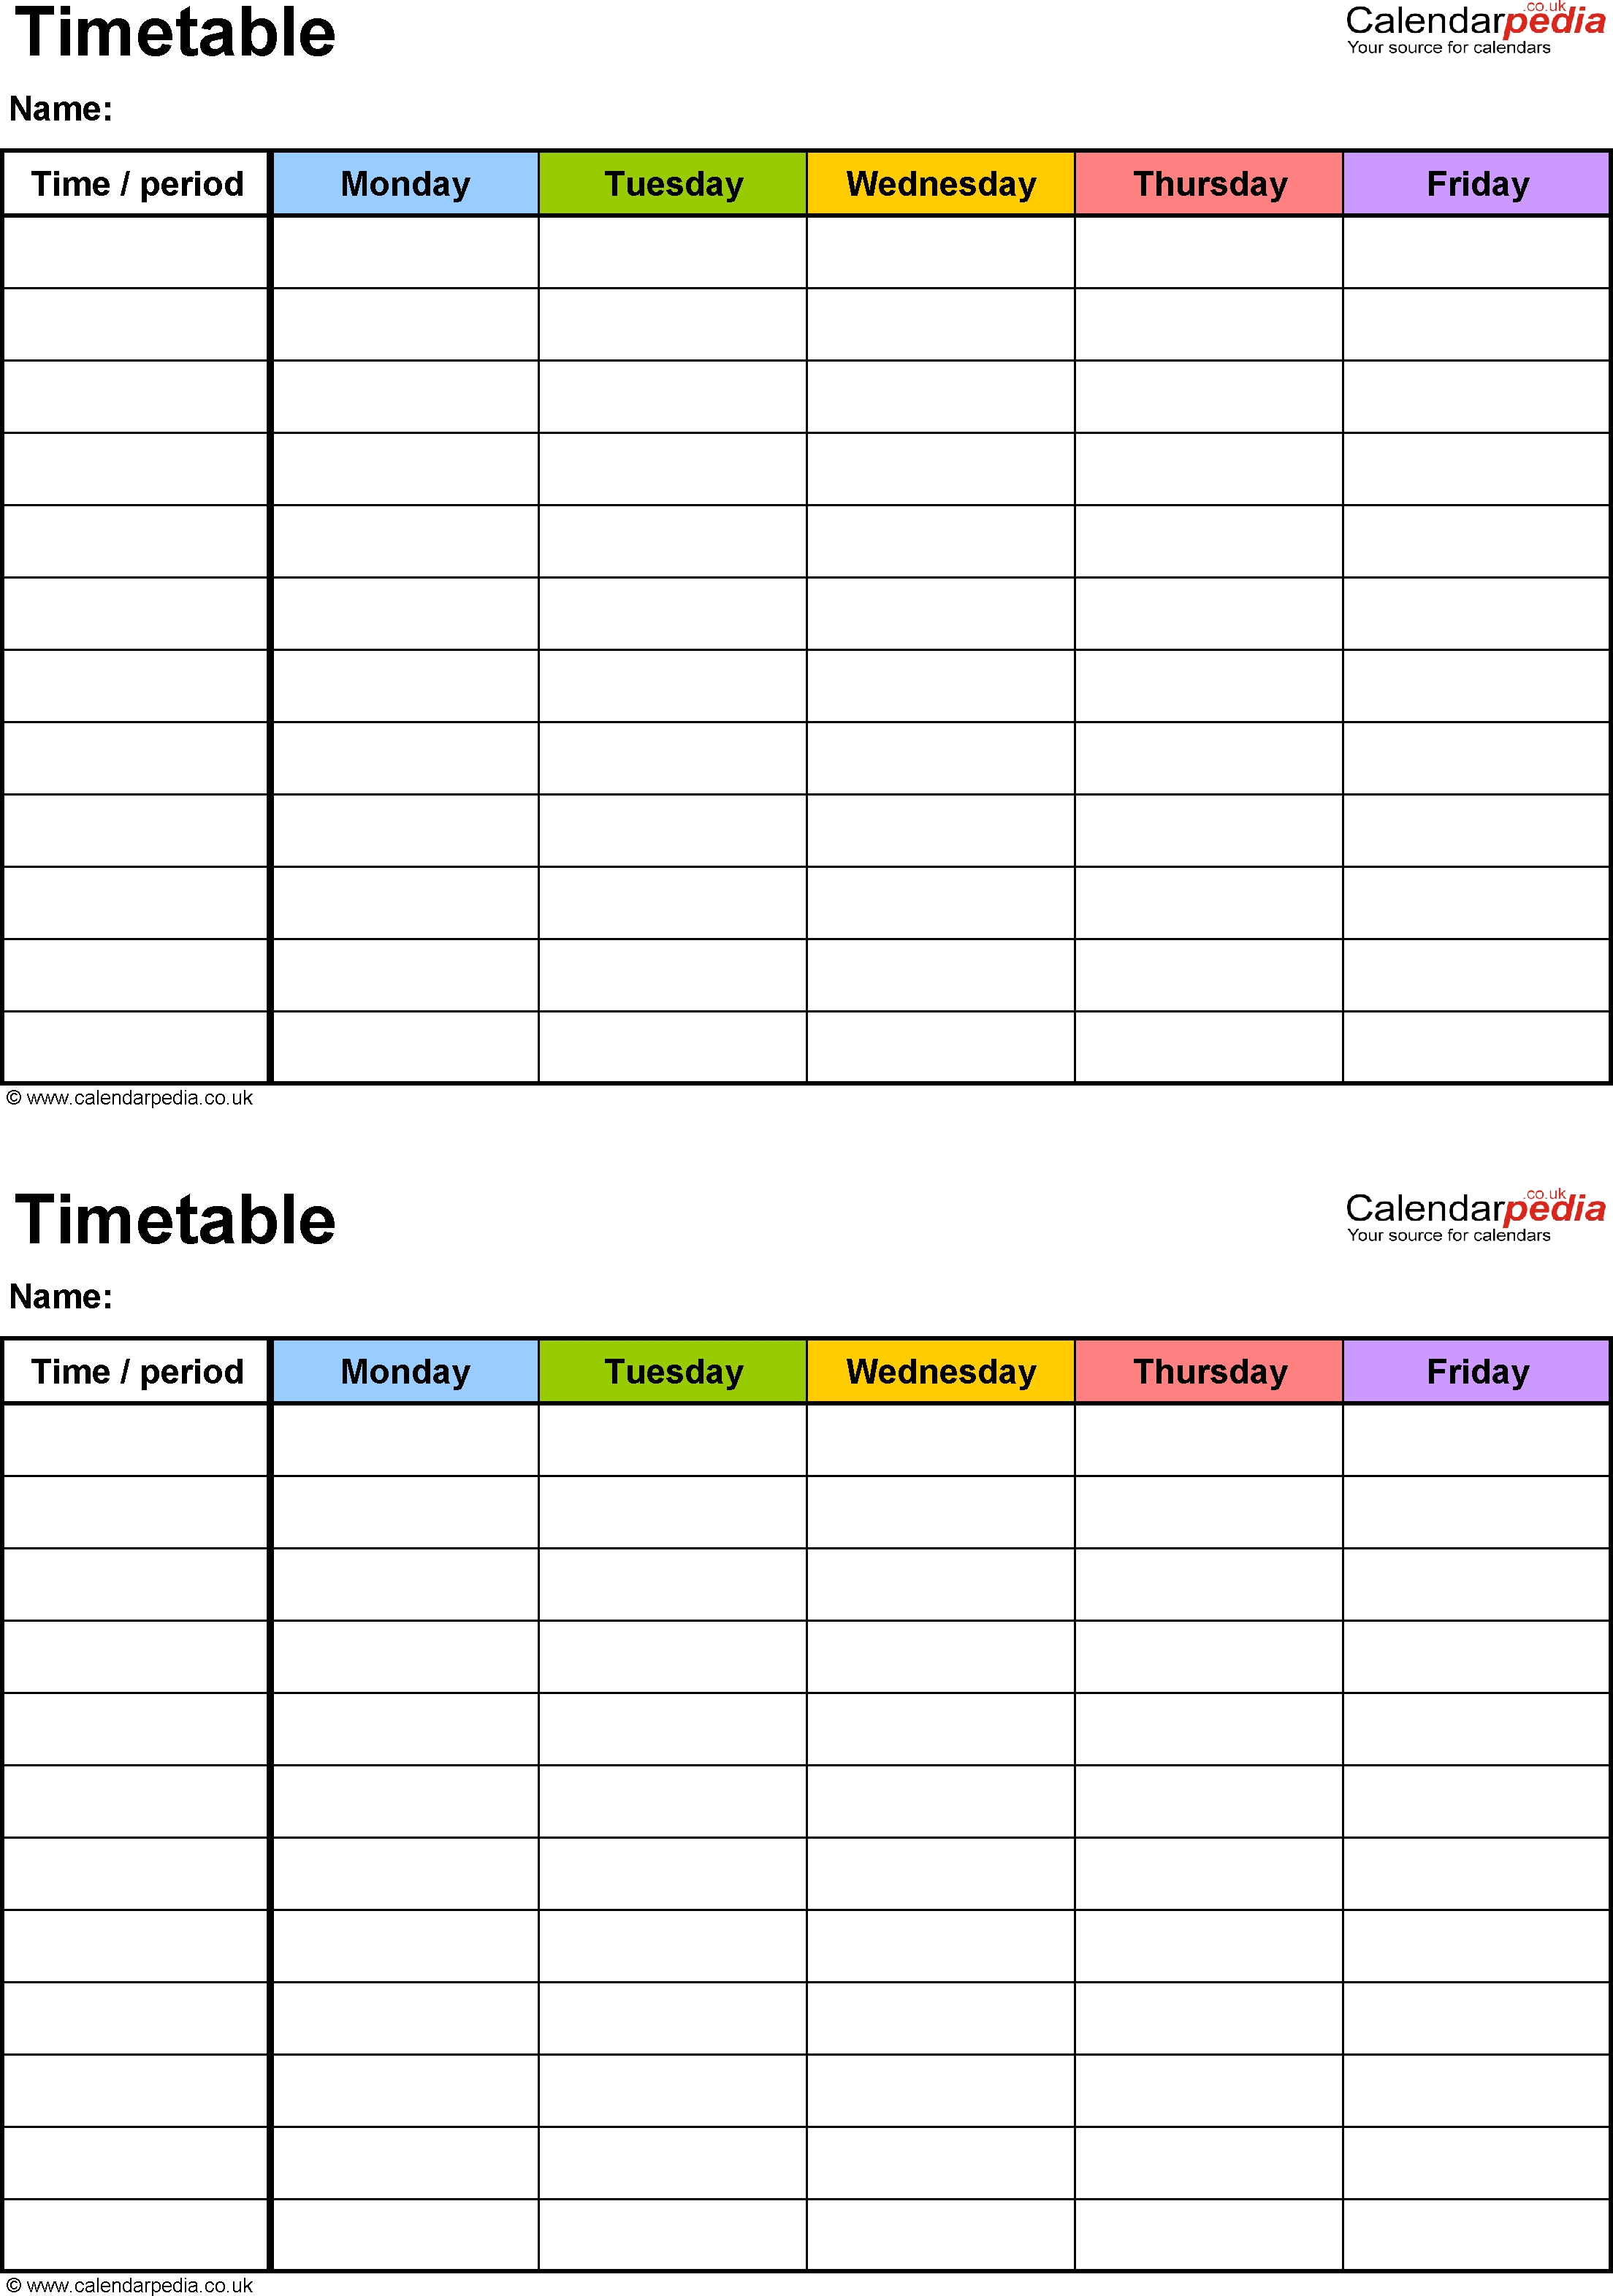 Excel Timetable Template 6: 2 A5 Timetables On One Page-Preschool Word Excel Calendar Template